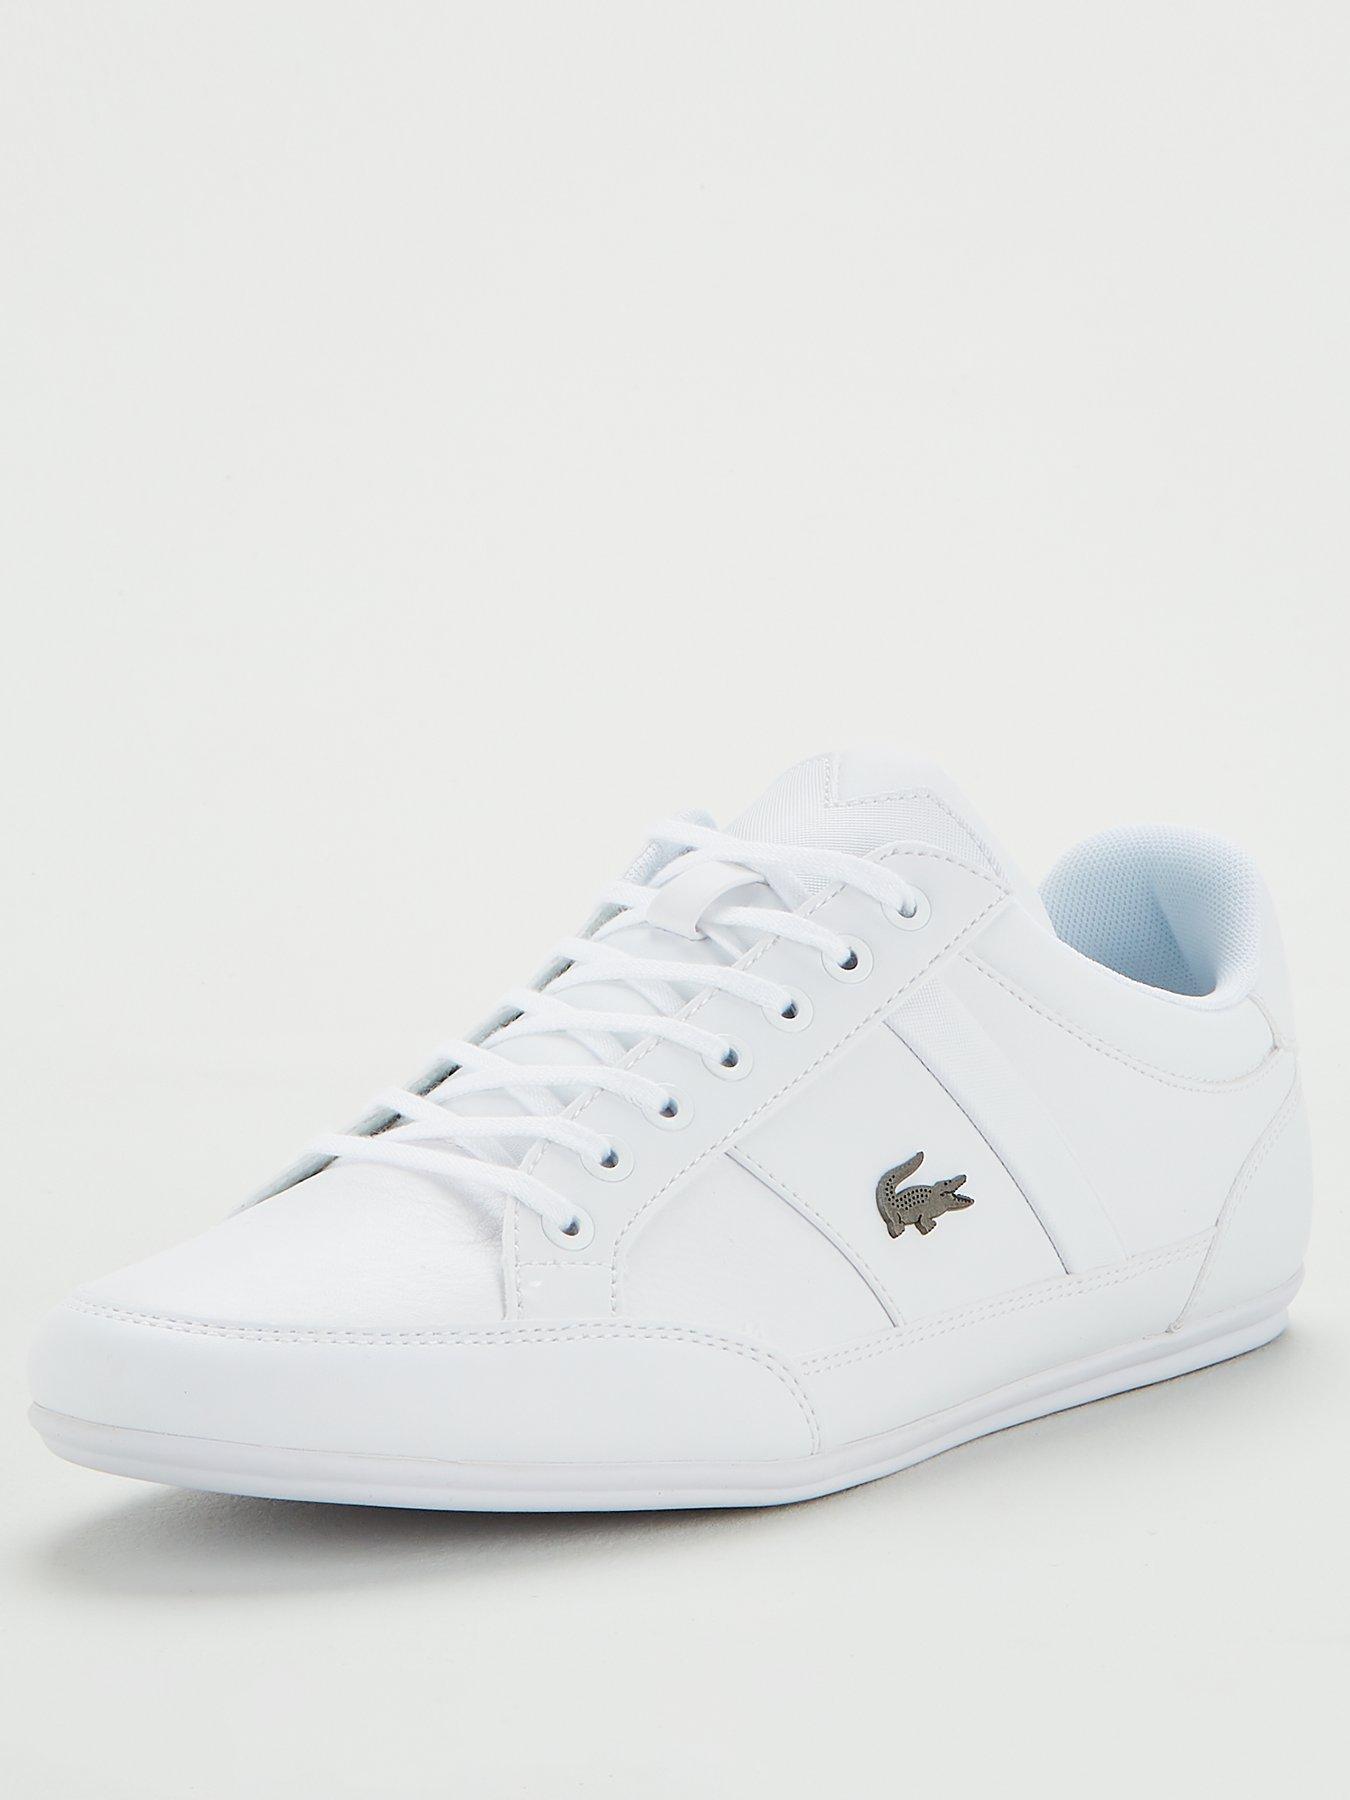 mens lacoste trainers grey